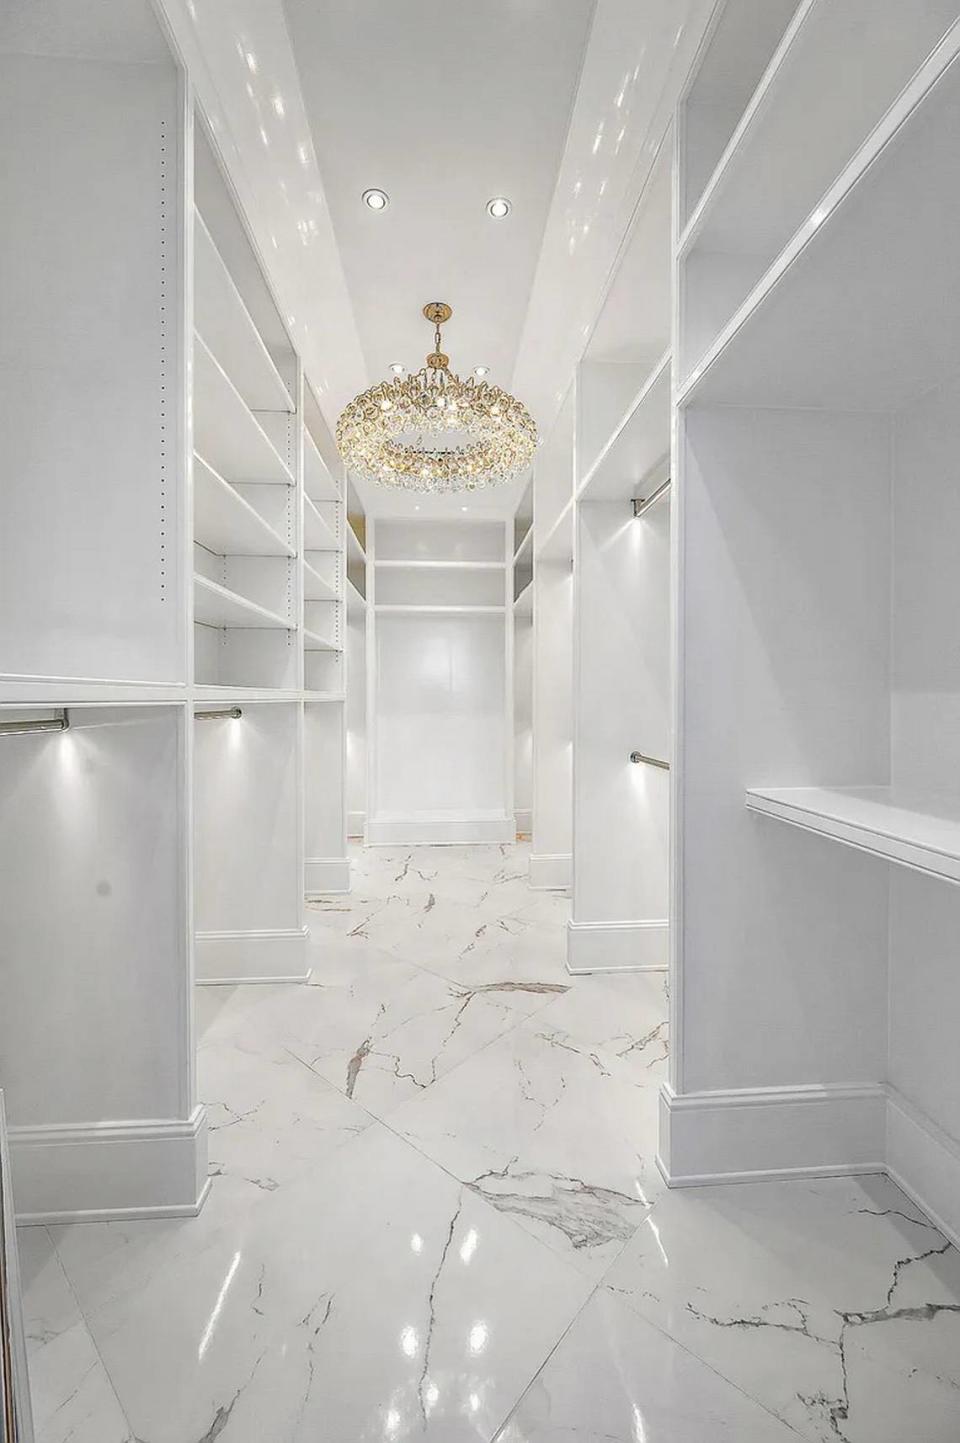 A view of another walk-in closet at 103 South Limestone No. 1150. This nearly 6,000 square foot condominium in downtown Lexington’s City Center has marble flooring all throughout and other high-end features. It’s currently for sale for $5 million. Note: Photos used with permission of seller’s representative.